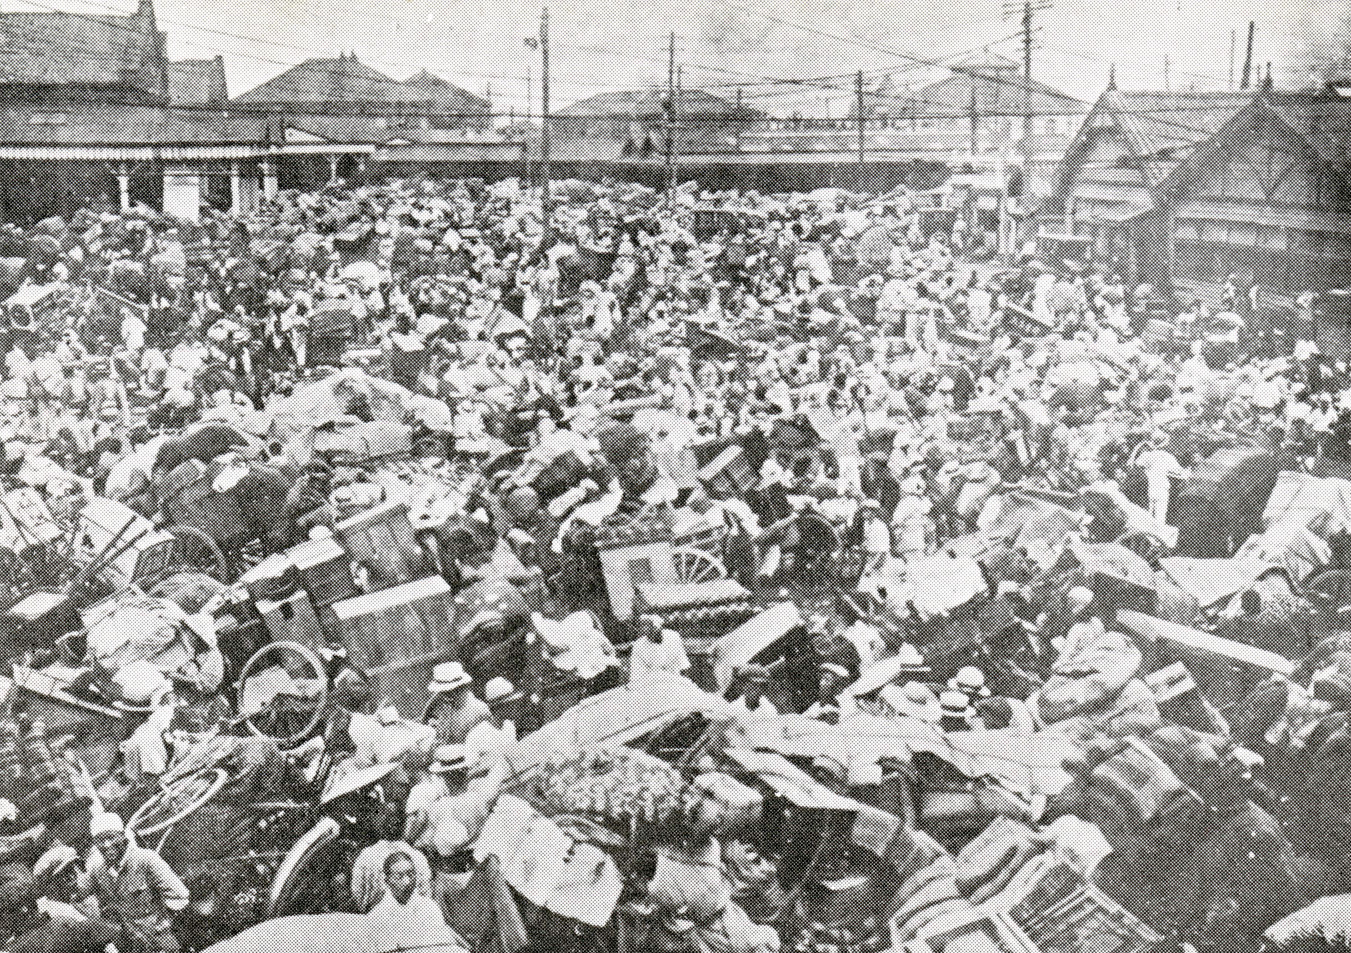 People heading to their home town with their possessions from Ueno Station.